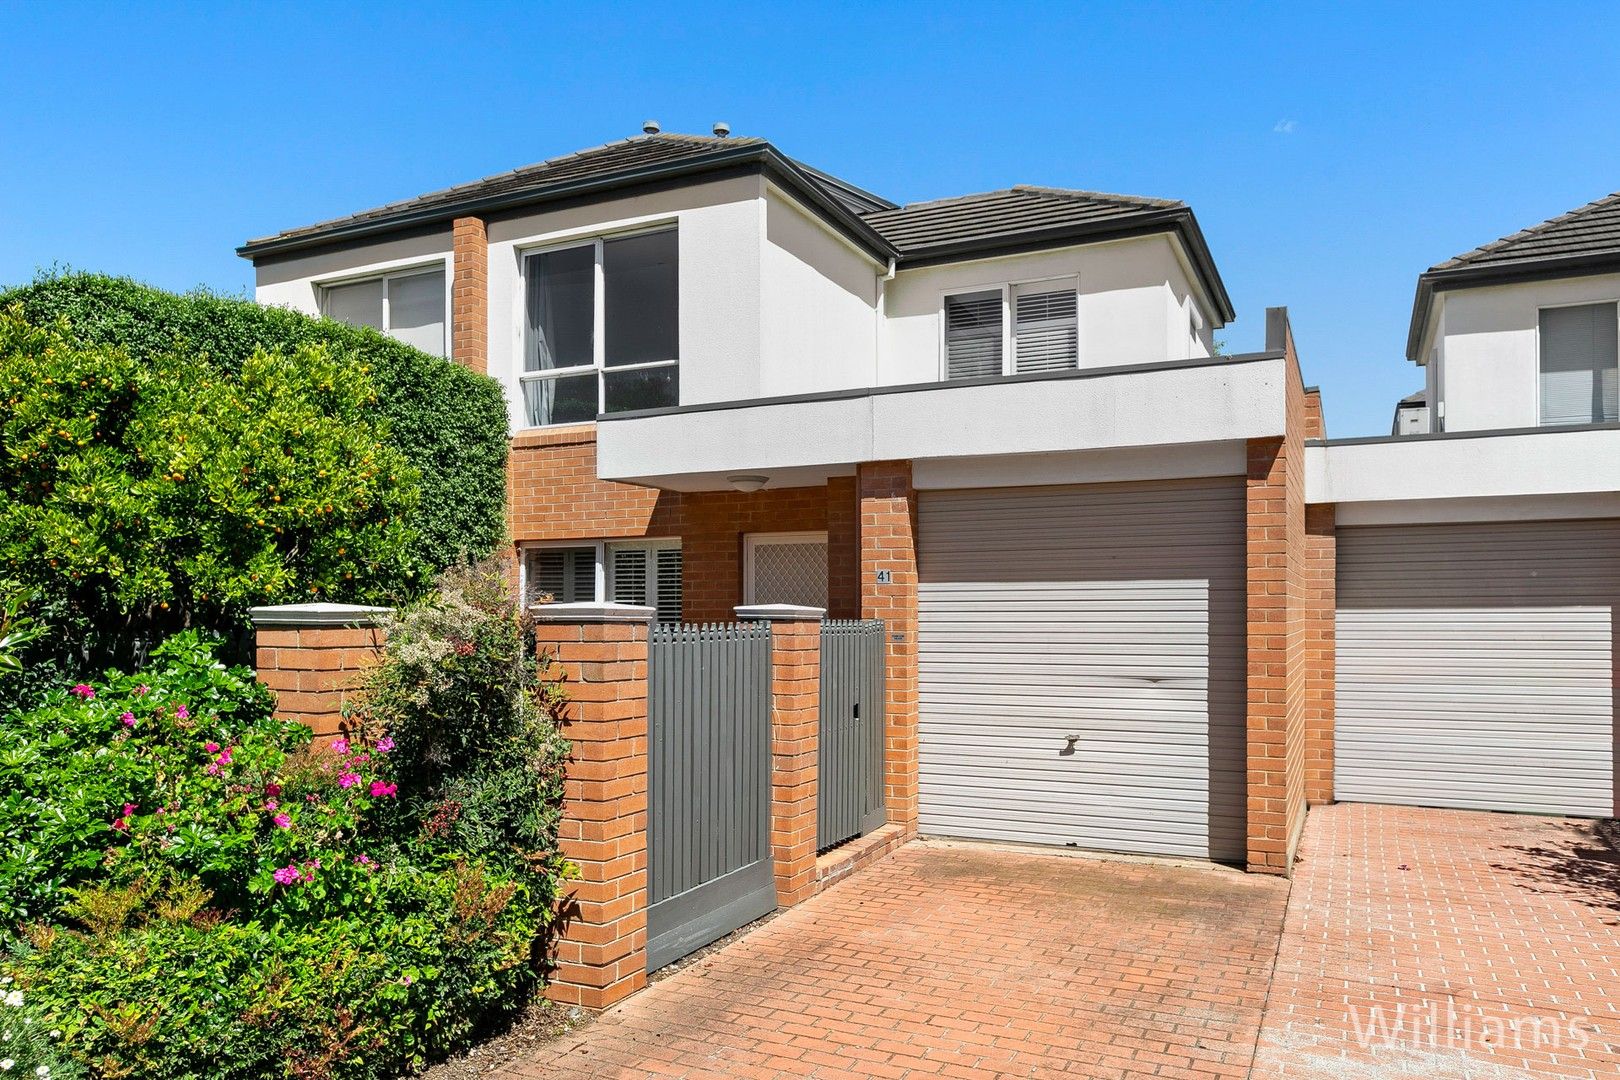 2 bedrooms Townhouse in 41/87-115 Nelson Place WILLIAMSTOWN VIC, 3016